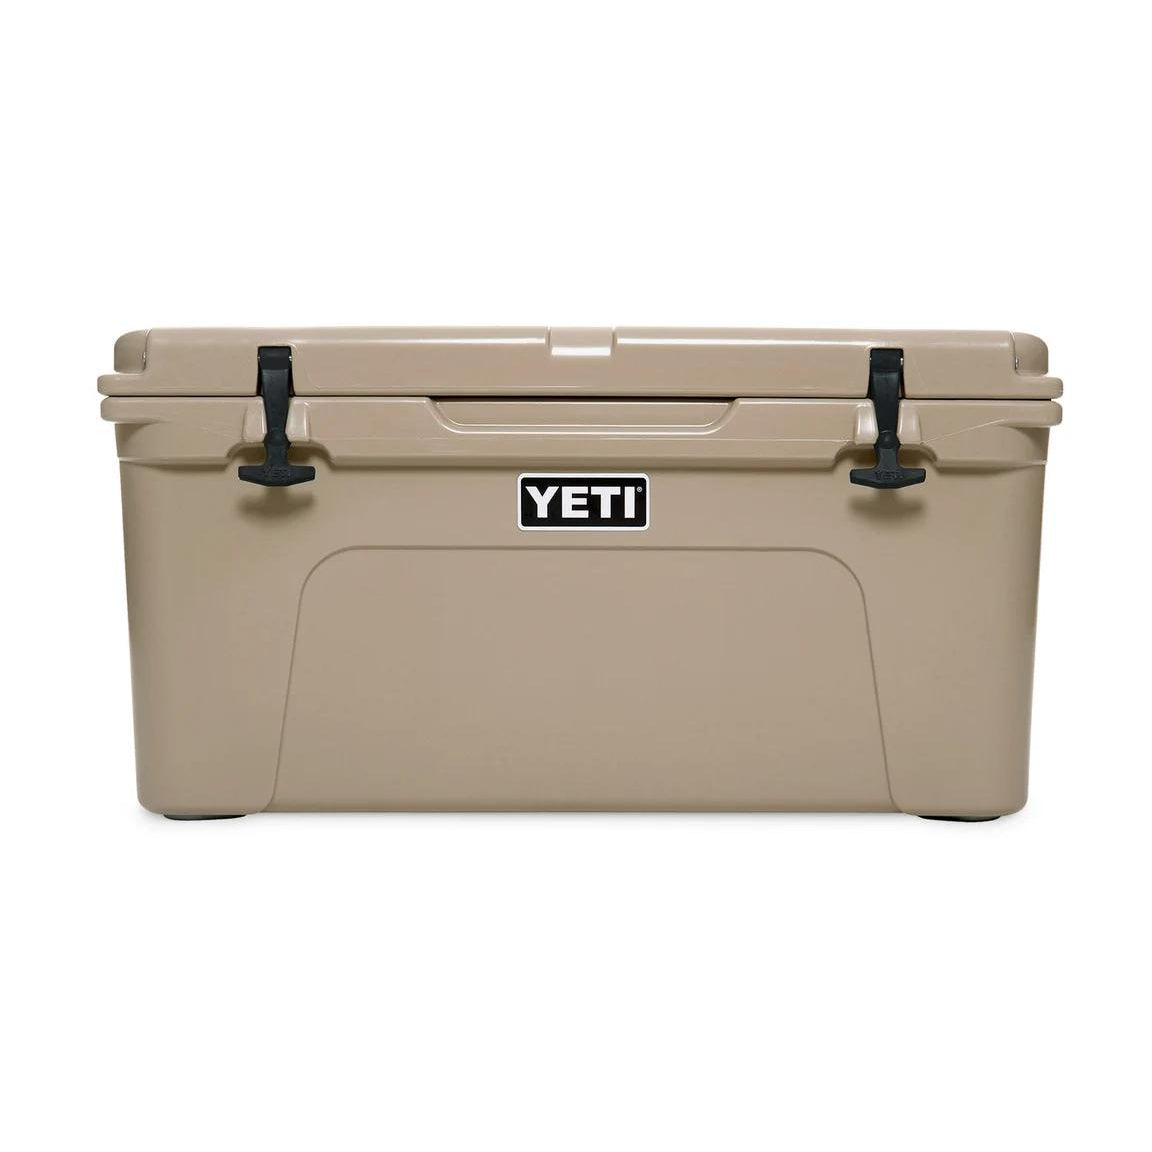 Yeti Tundra 65 Cooler-HUNTING/OUTDOORS-DESERT TAN-Kevin's Fine Outdoor Gear & Apparel